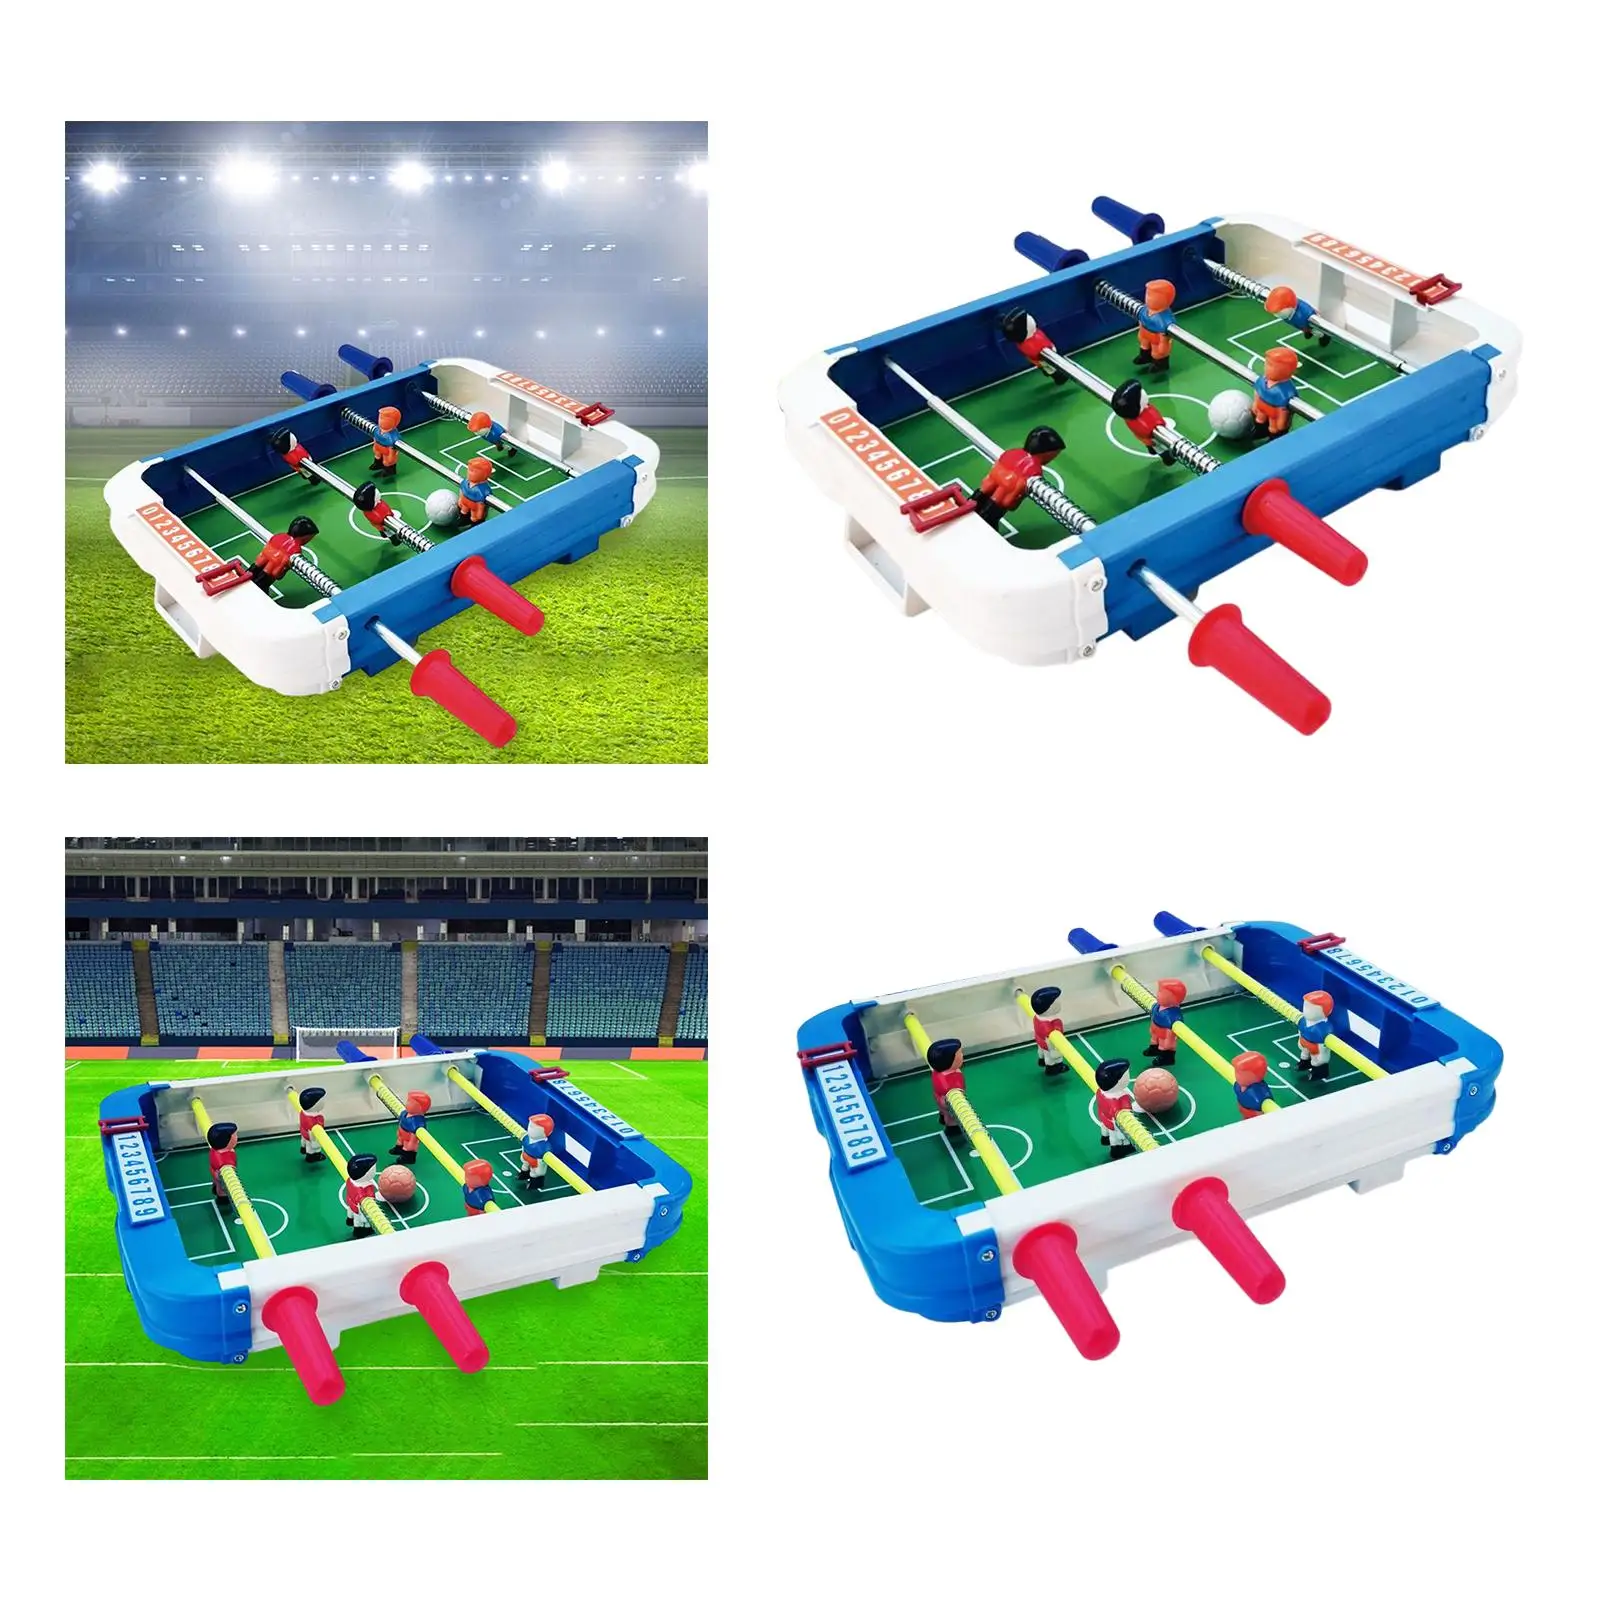 Mini Foosball Table, Desktop Football Board Games Entertainment Table Top Soccer Game for Parent Child Interaction Family Night